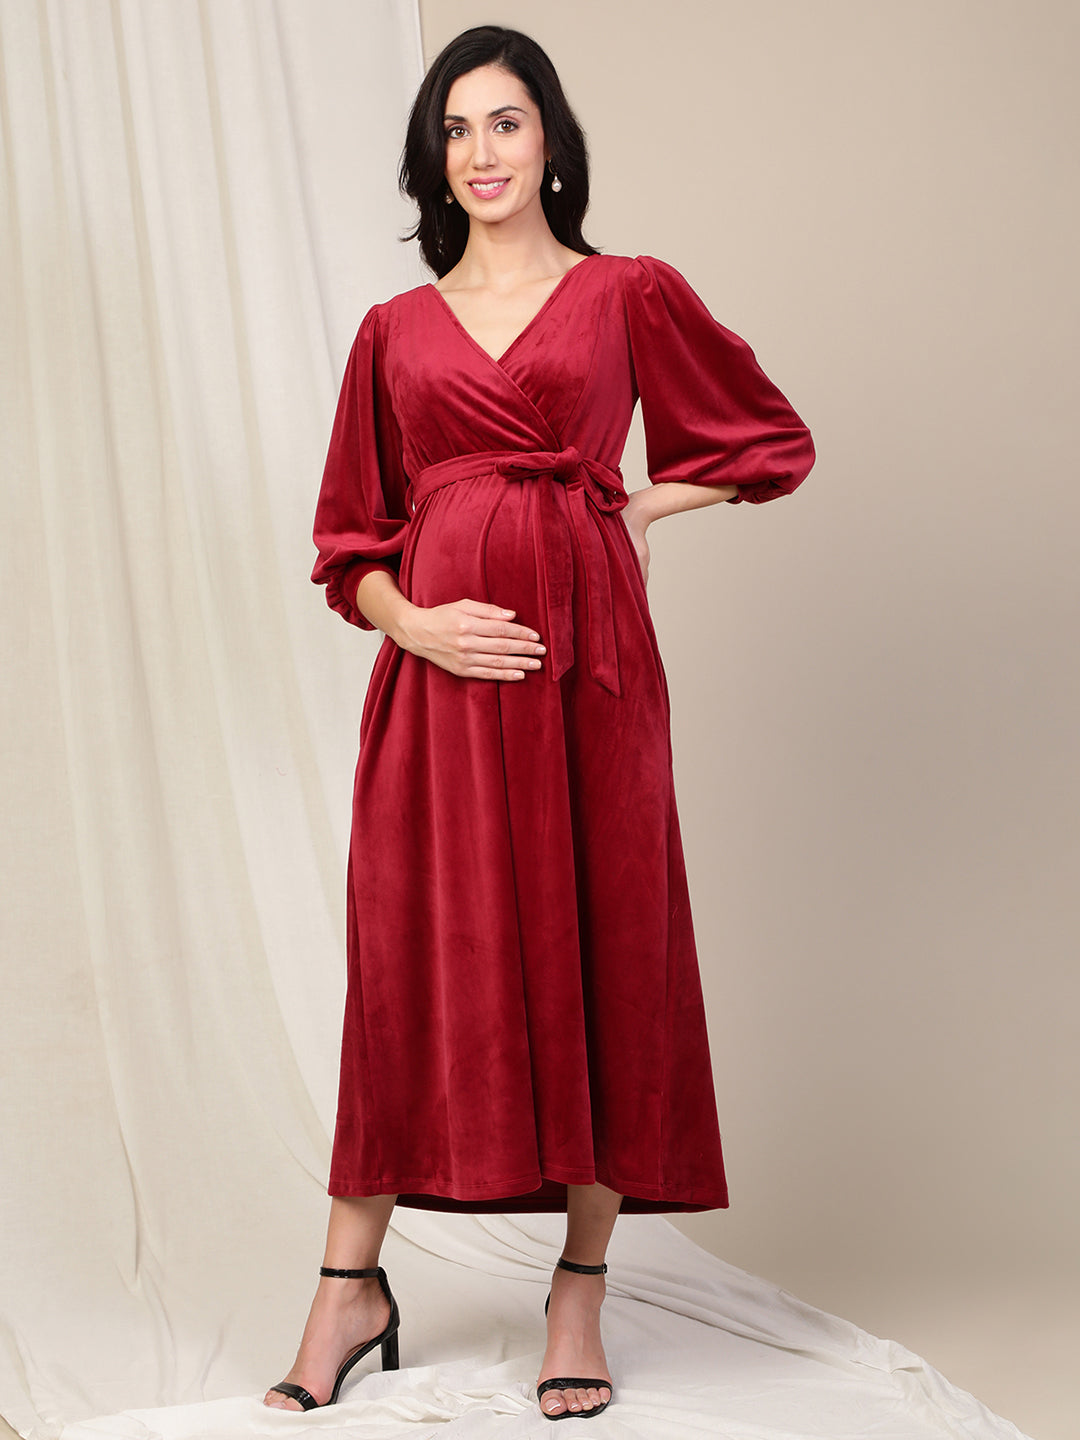 Maternity Chiffon Party/Cocktail Ball Gowns for Women for sale | eBay